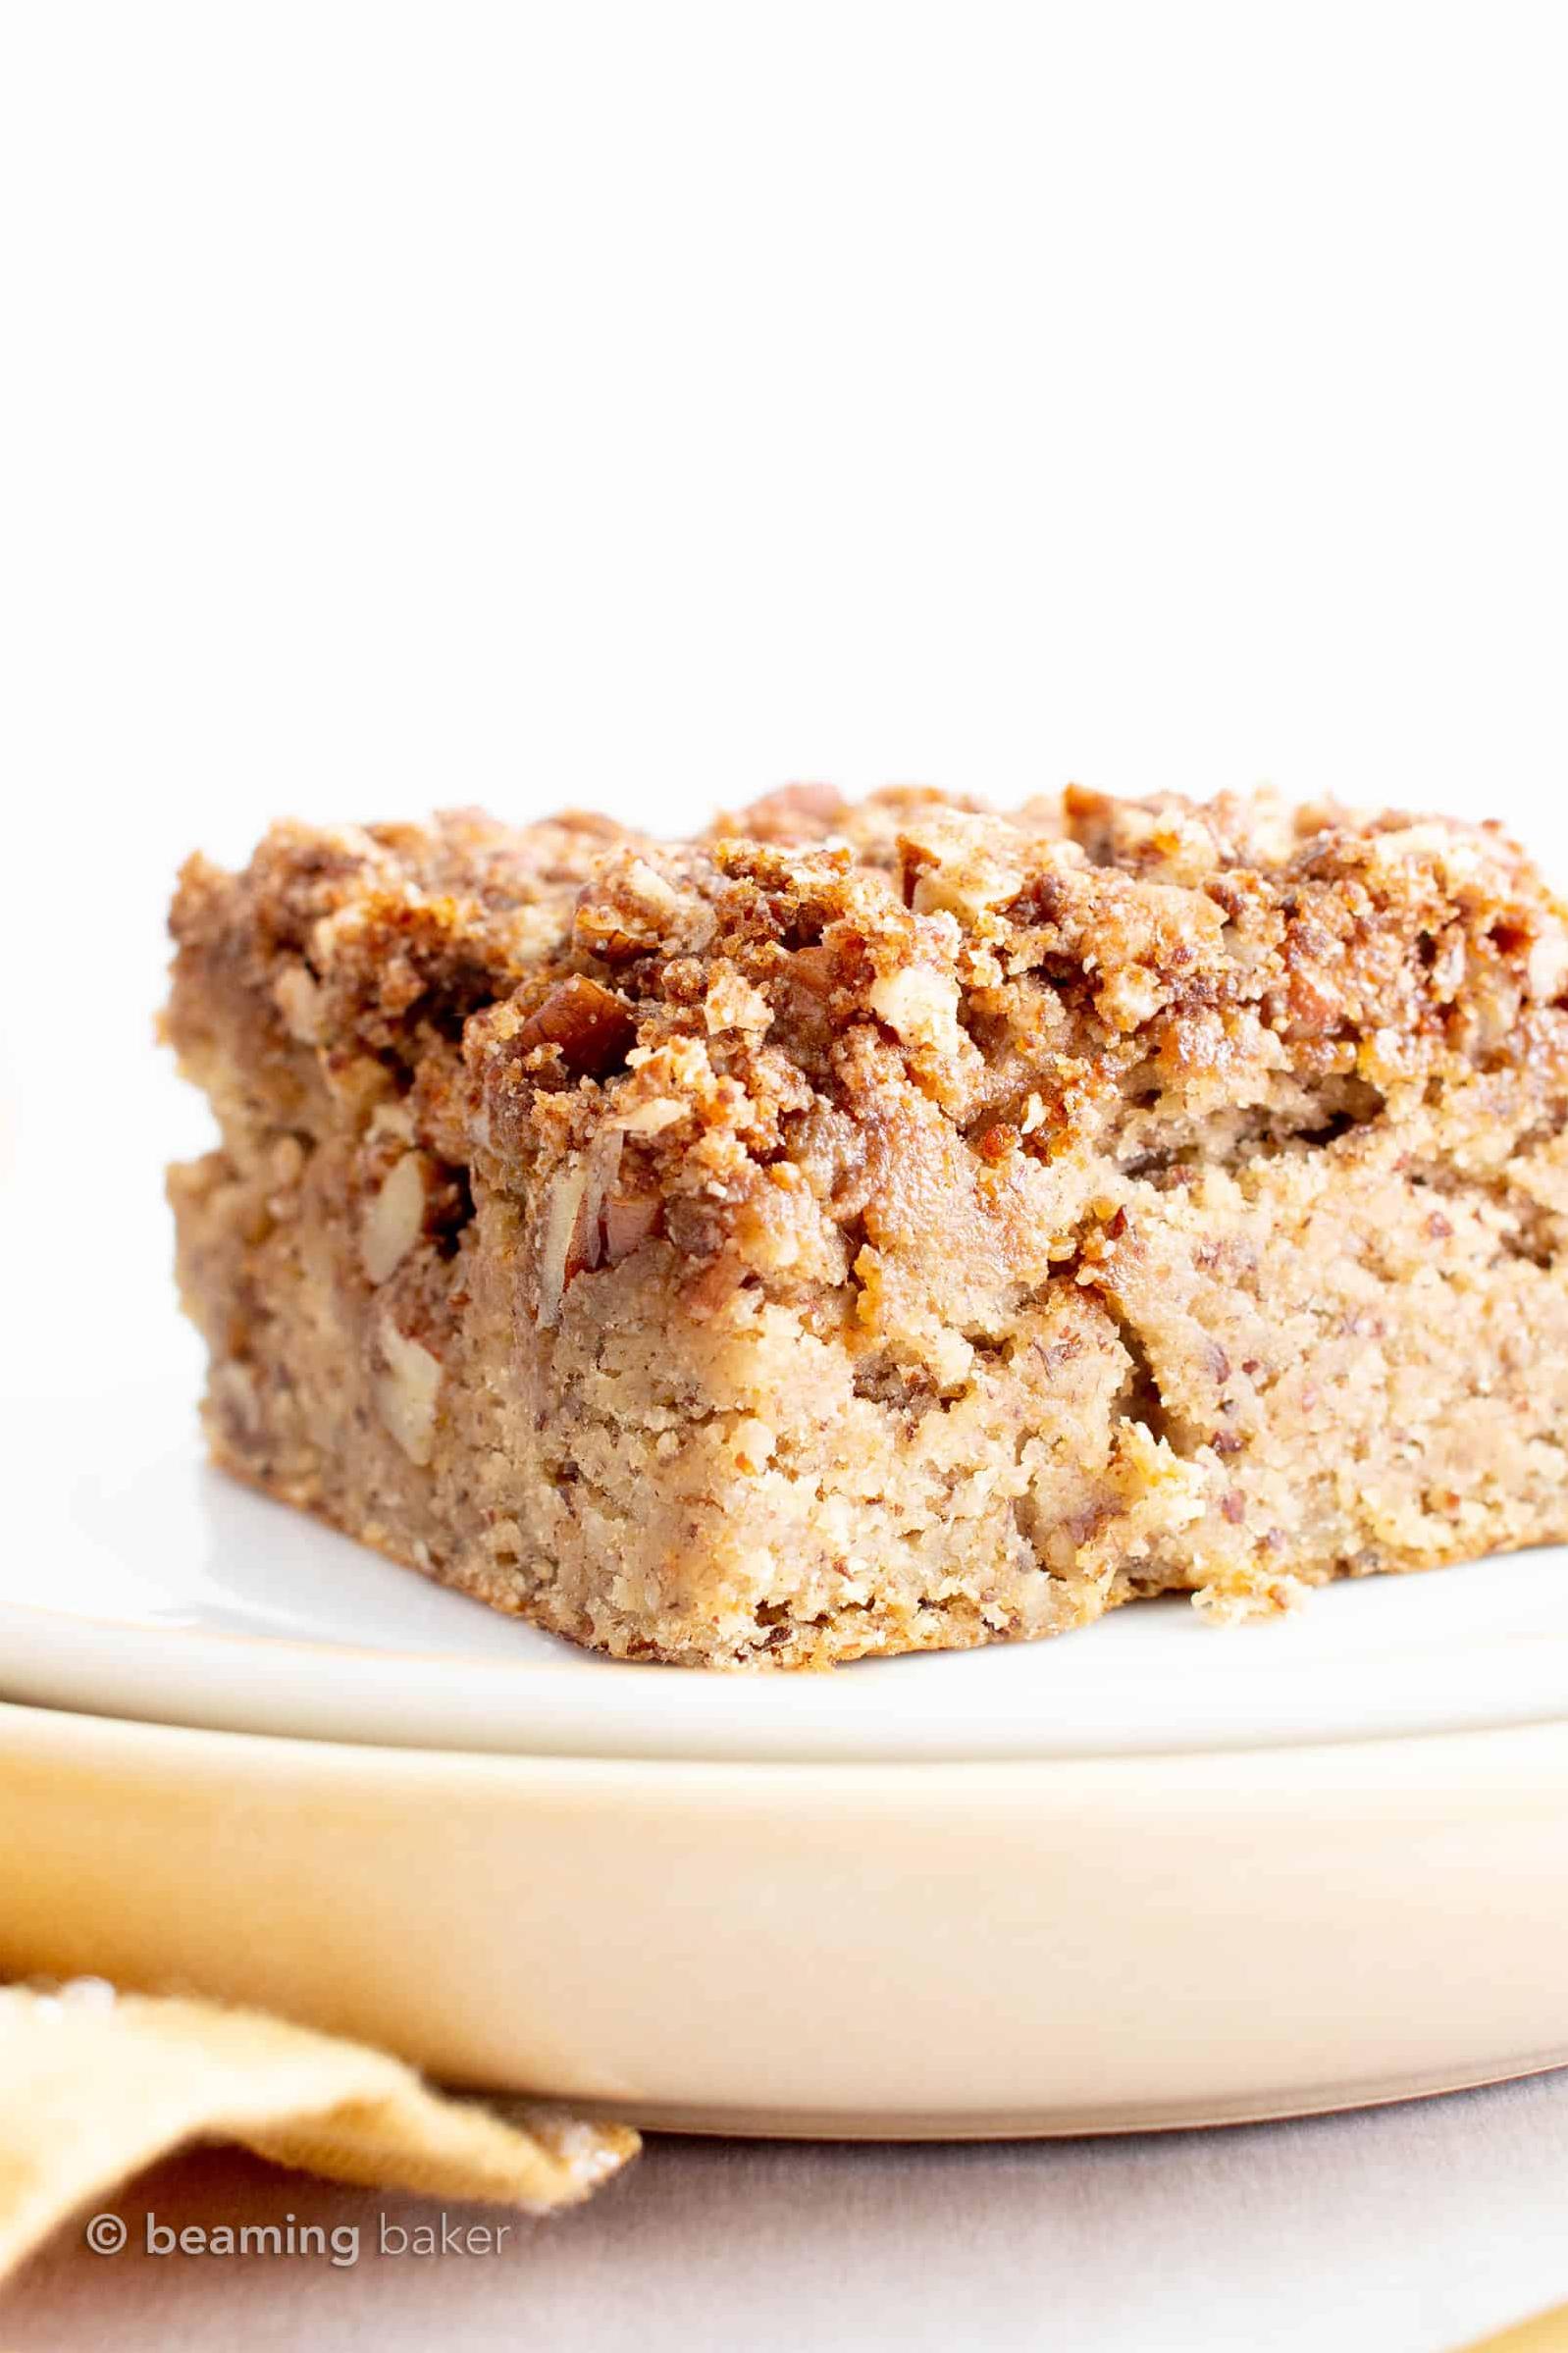  Whether it's breakfast, dessert or a snack, this coffee cake fits the bill perfectly.